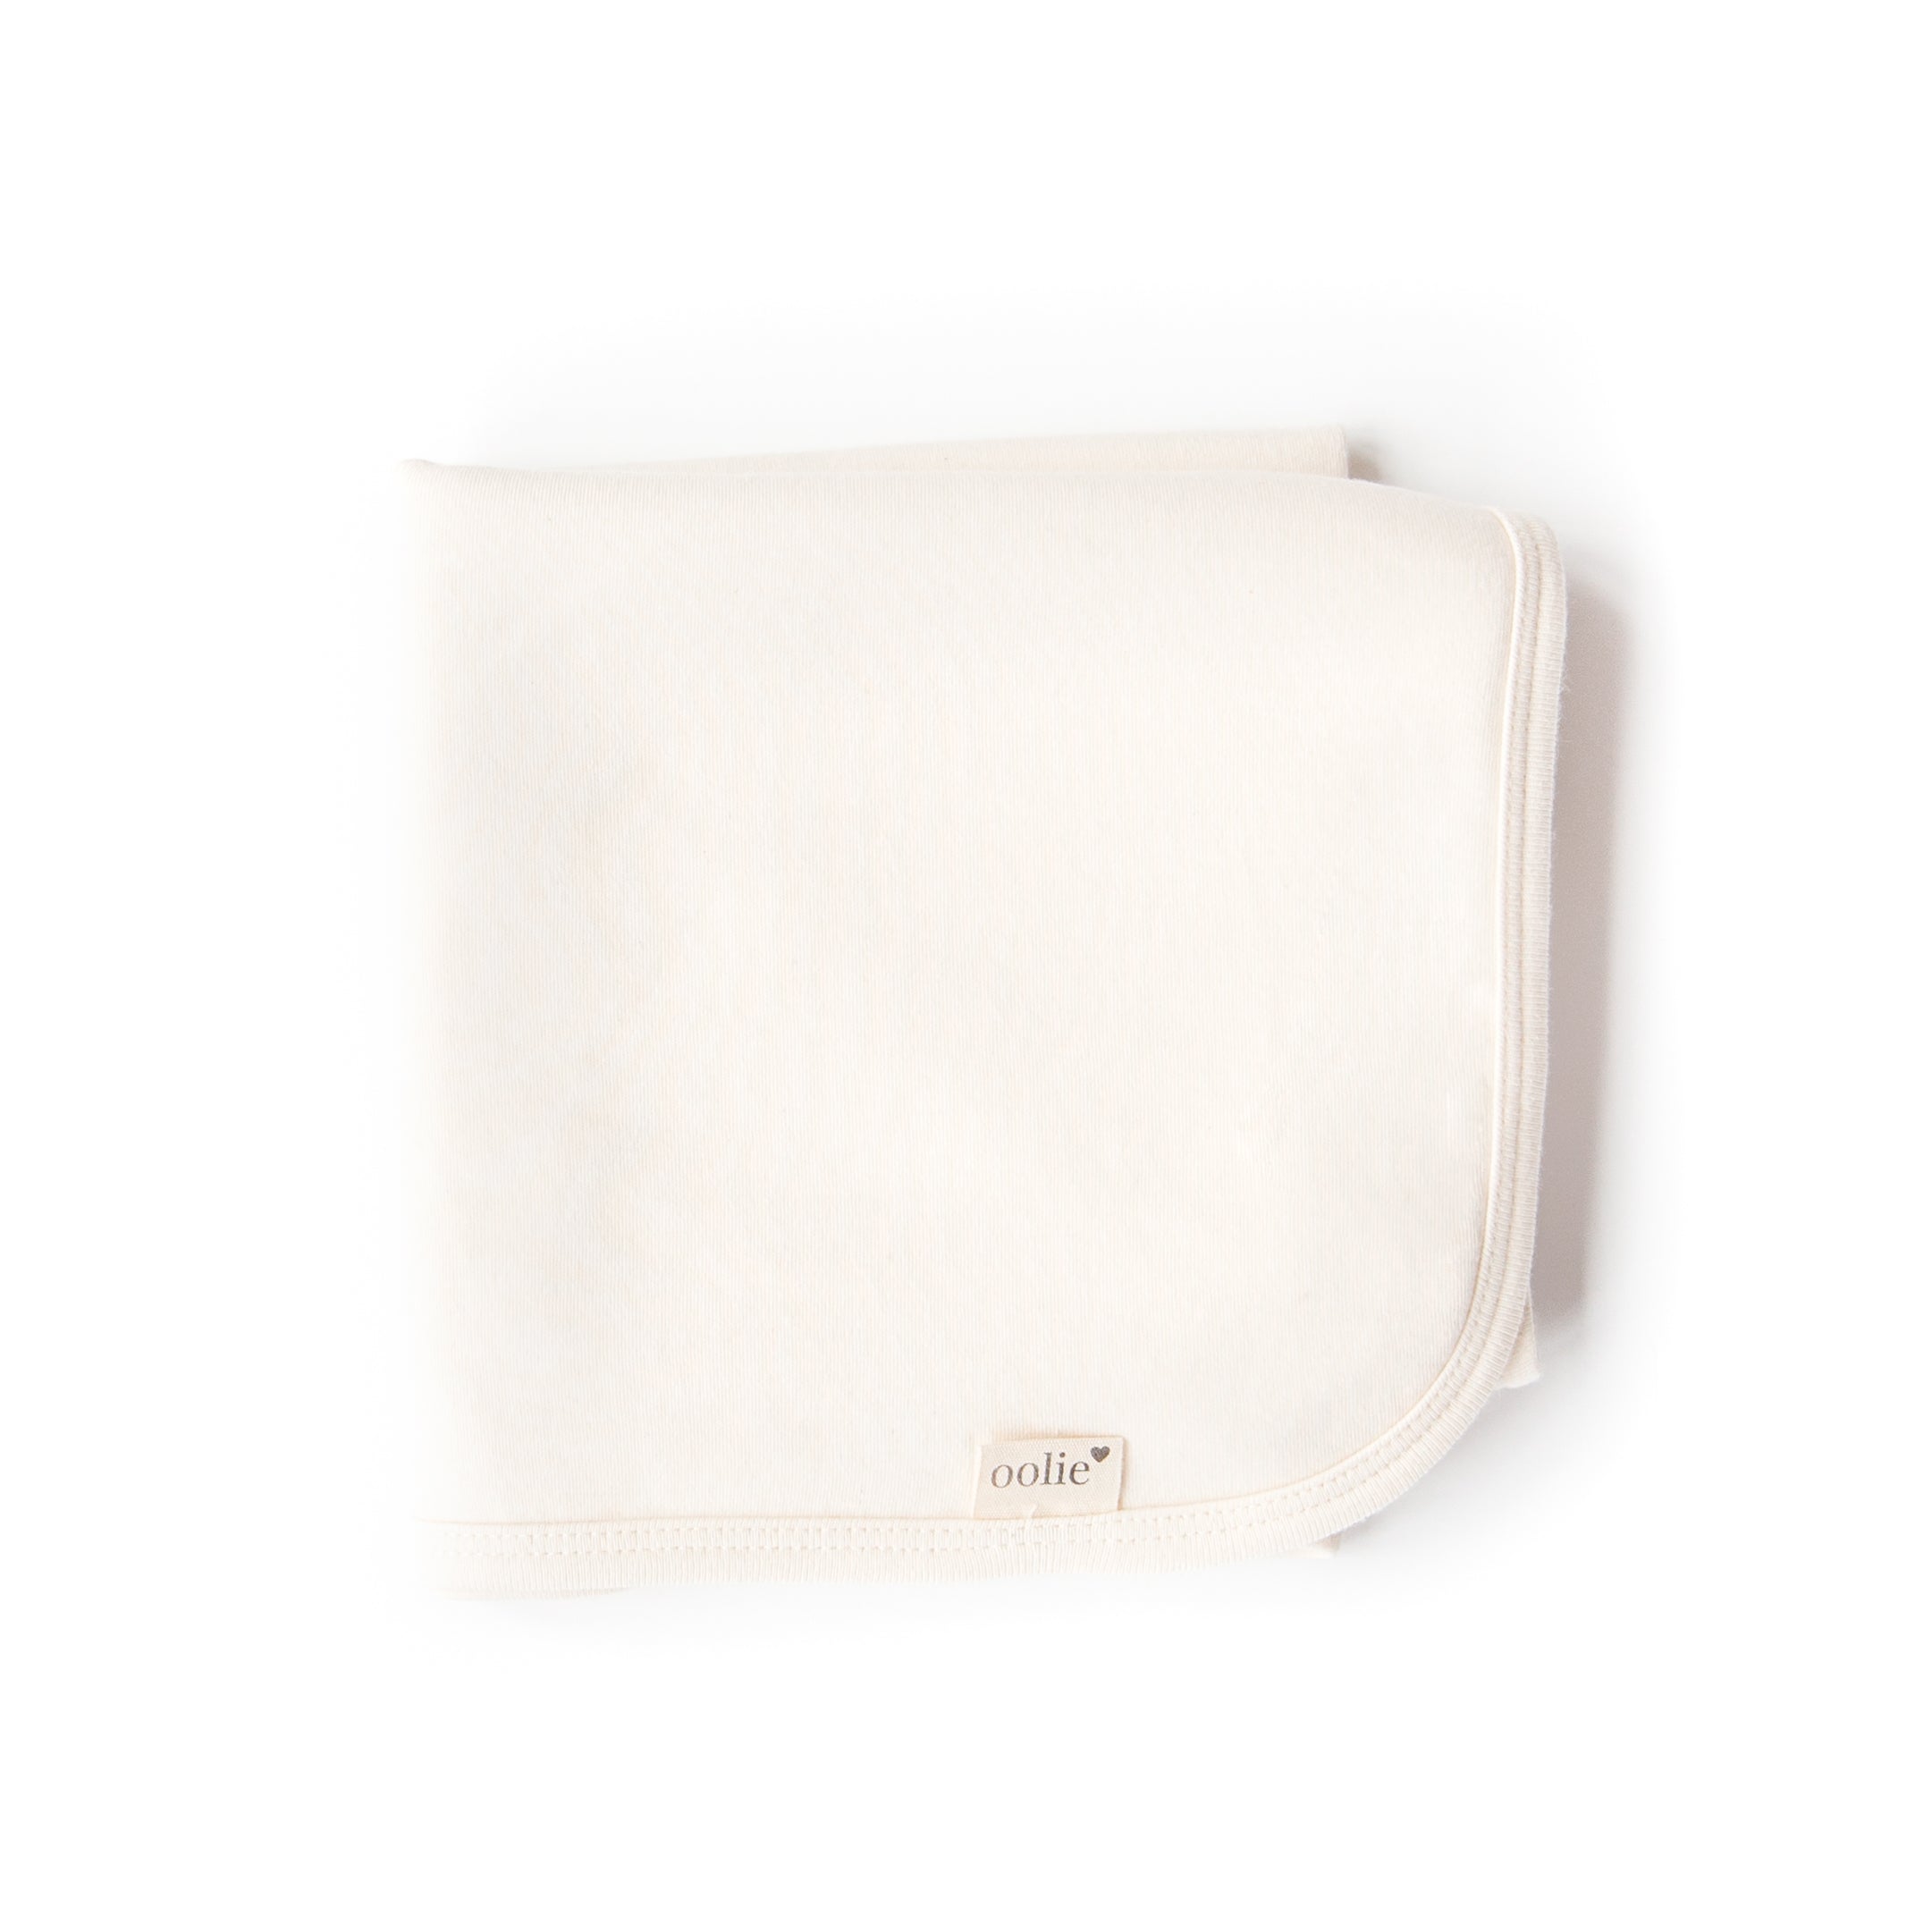 A natural Oolie organic cotton baby blanket, unprinted, revealing its natural, undyed, unbleached color.